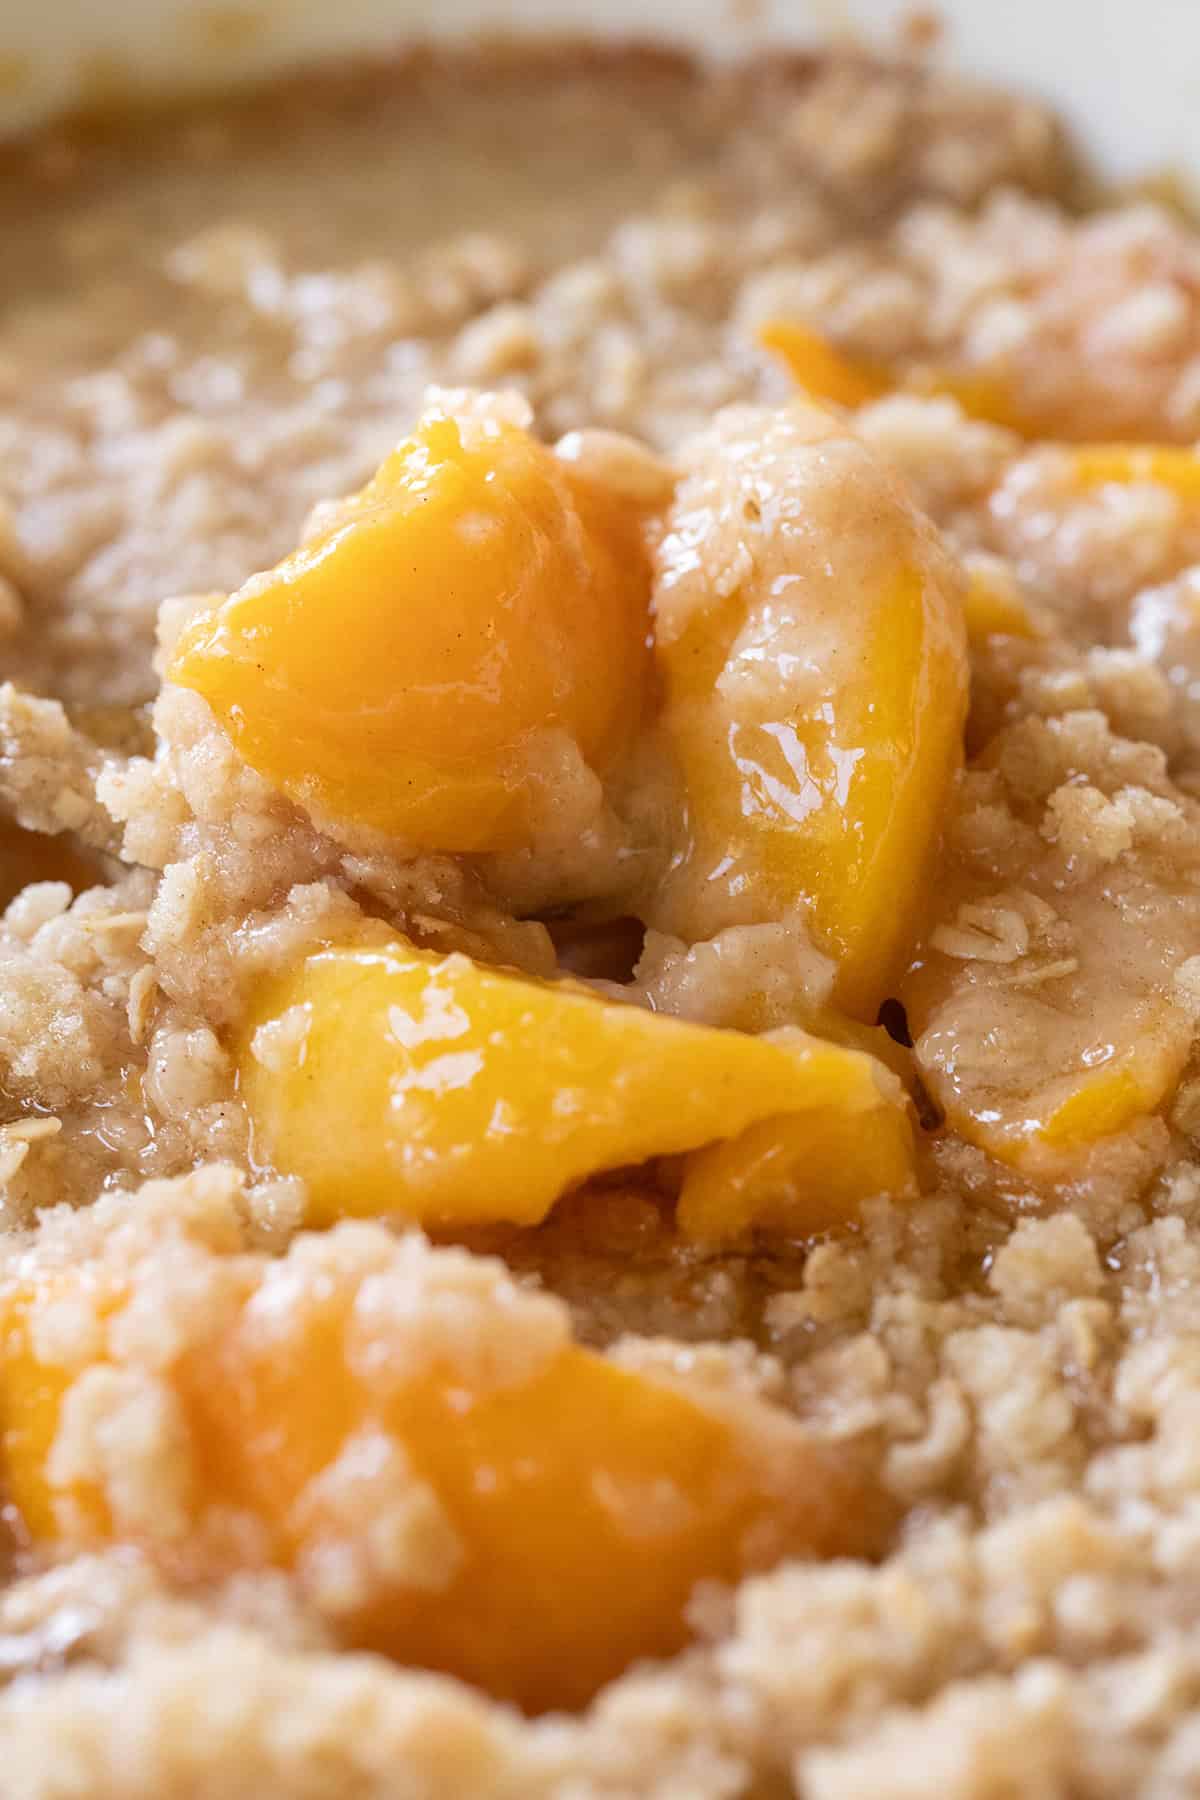 Canned peach crisp with a buttery crisp topping.